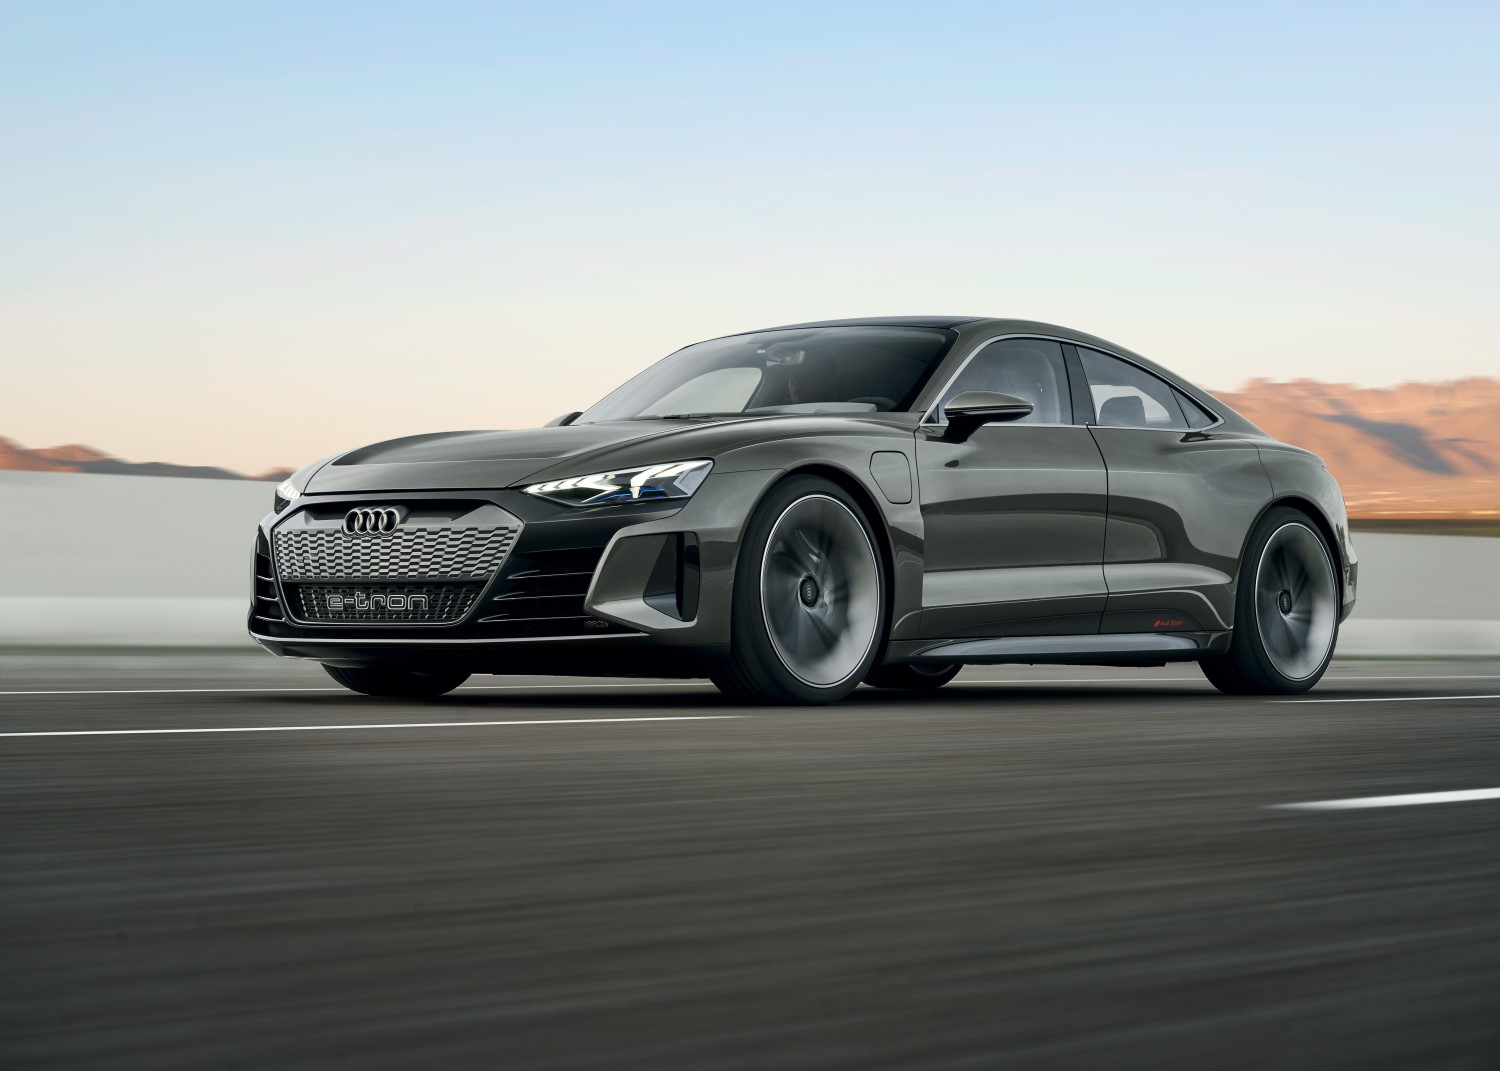 Cars like the Audi E-Tron GT will drive cars owners away from internal combustion engine cars